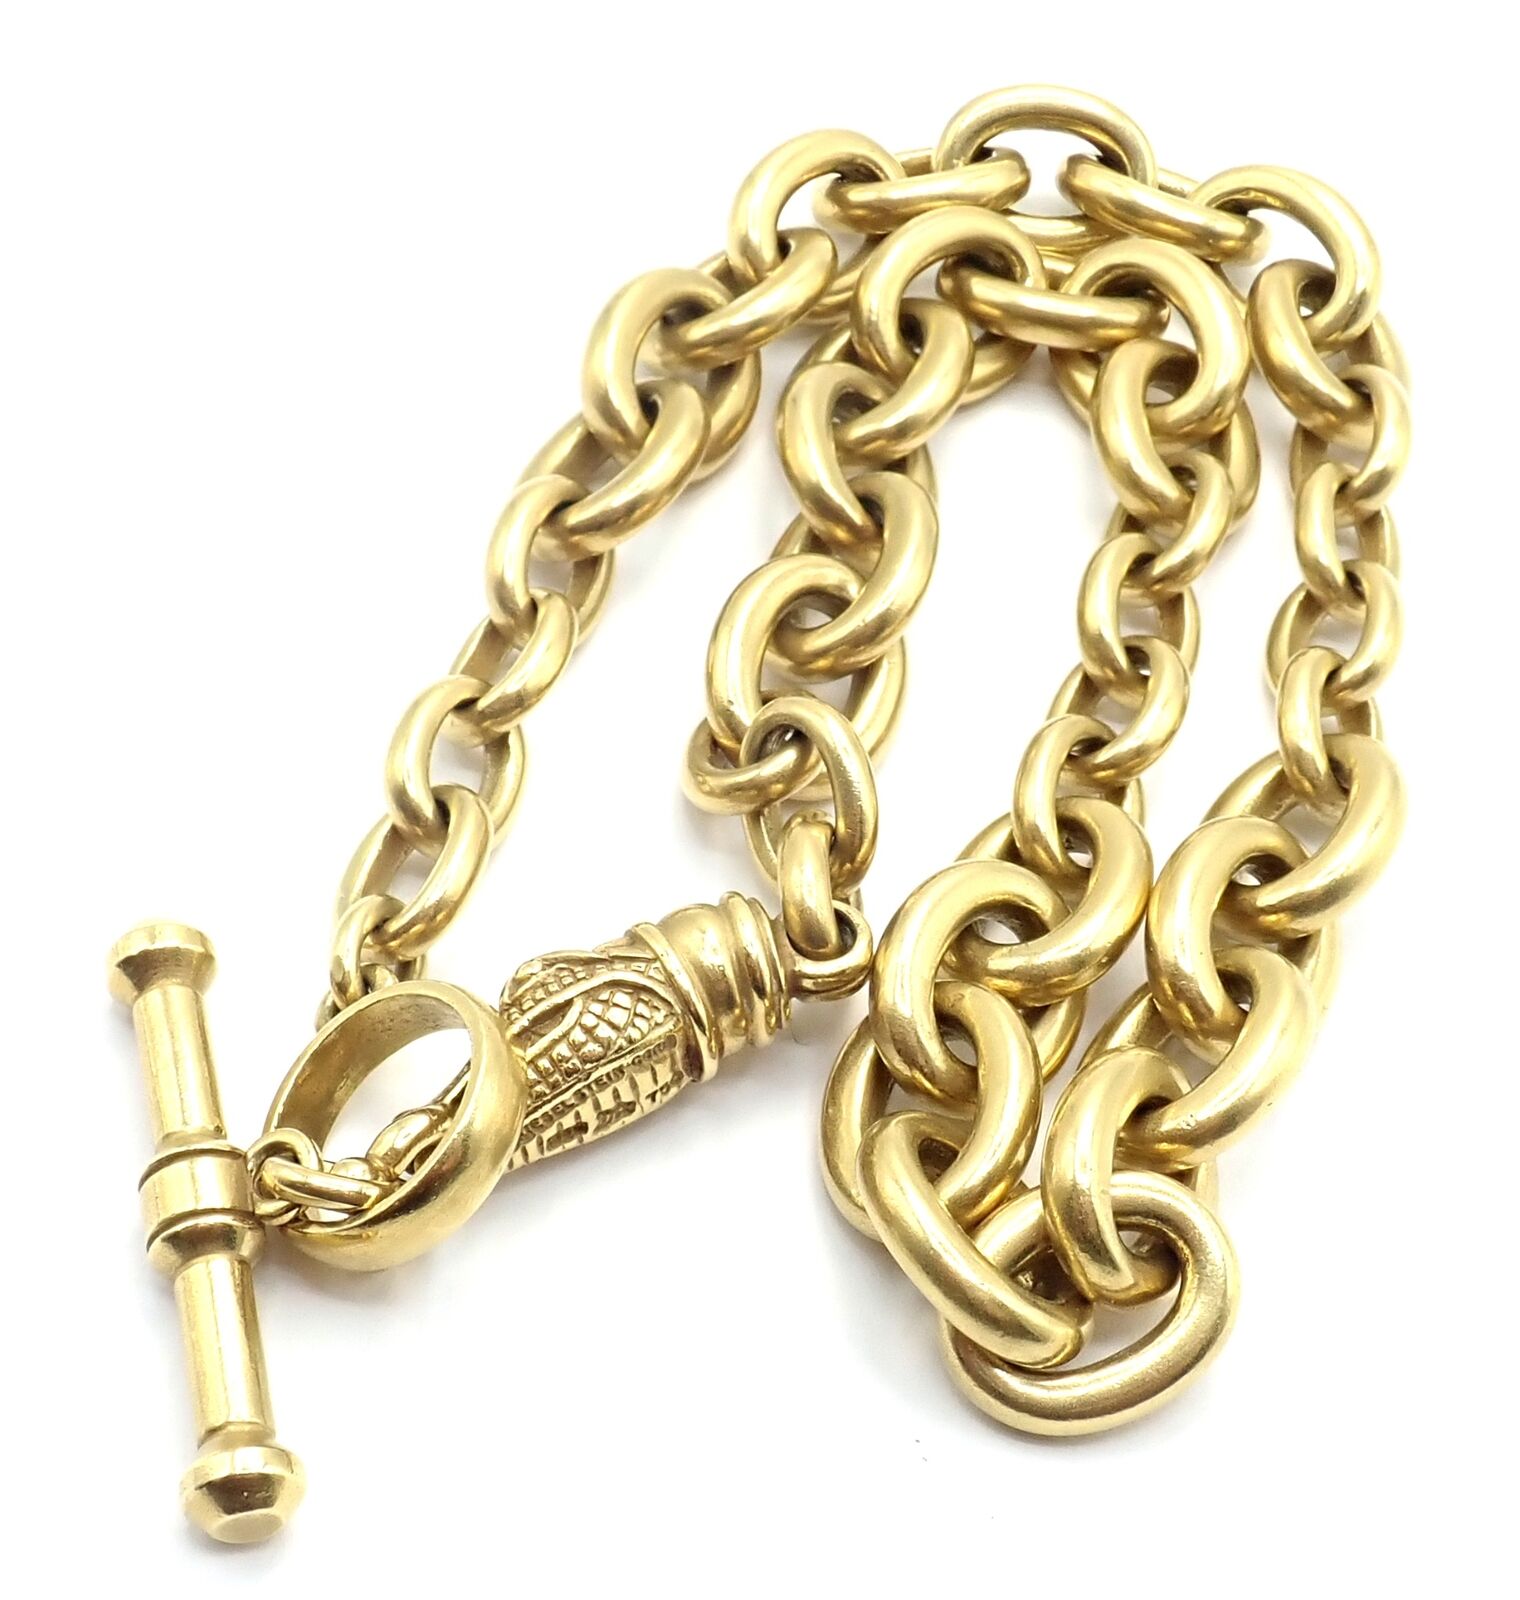 Kieselstein-Cord Jewelry & Watches:Fine Jewelry:Necklaces & Pendants Authentic! Kieselstein Cord 18k Yellow Gold Alligator Head Link Toggle Necklace